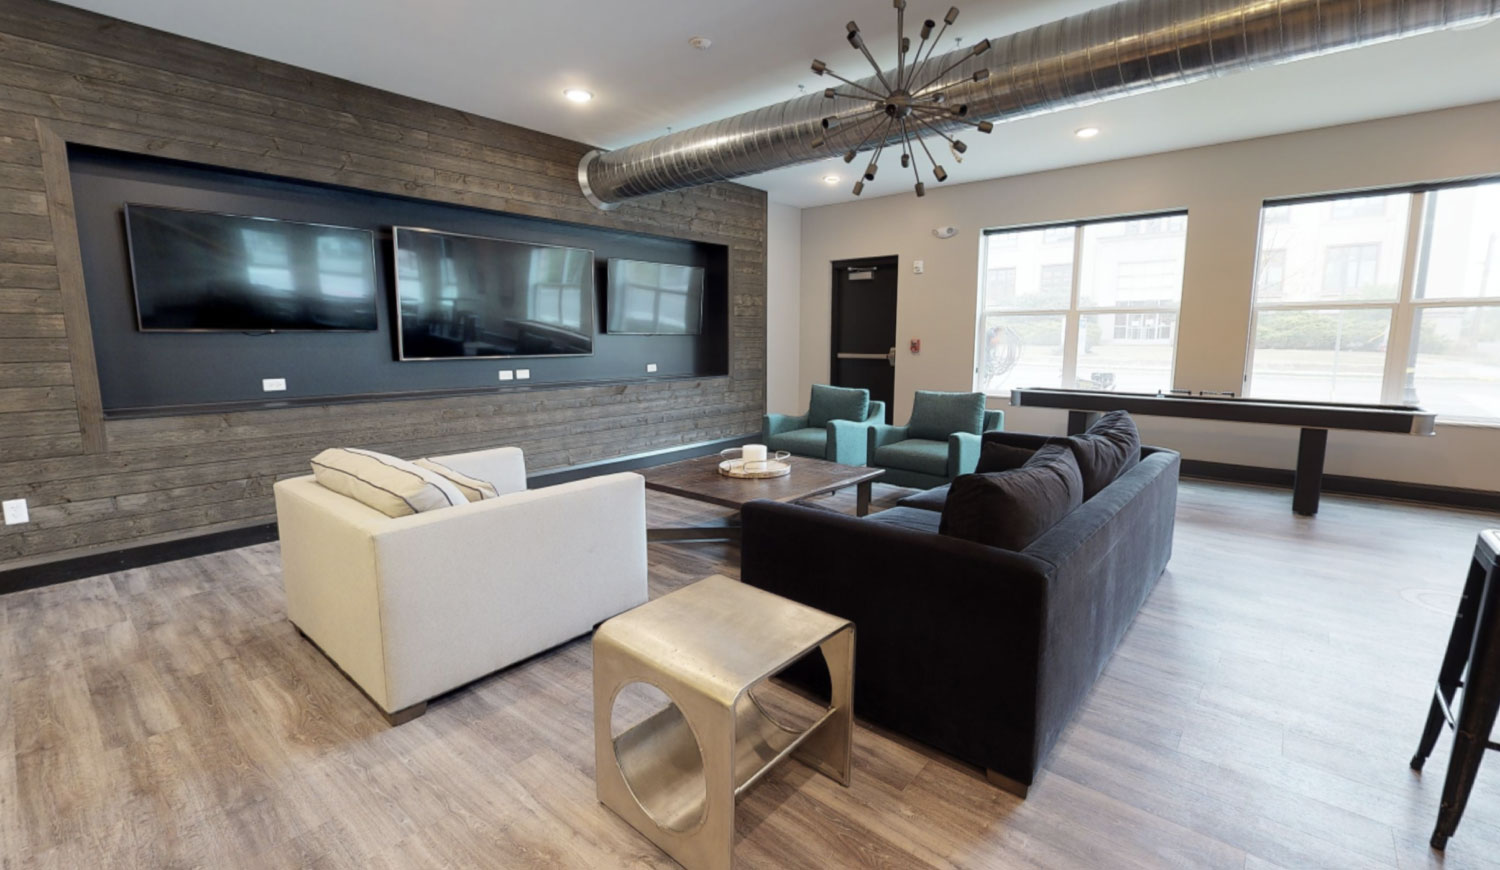 Spacious community room with tvs and couches